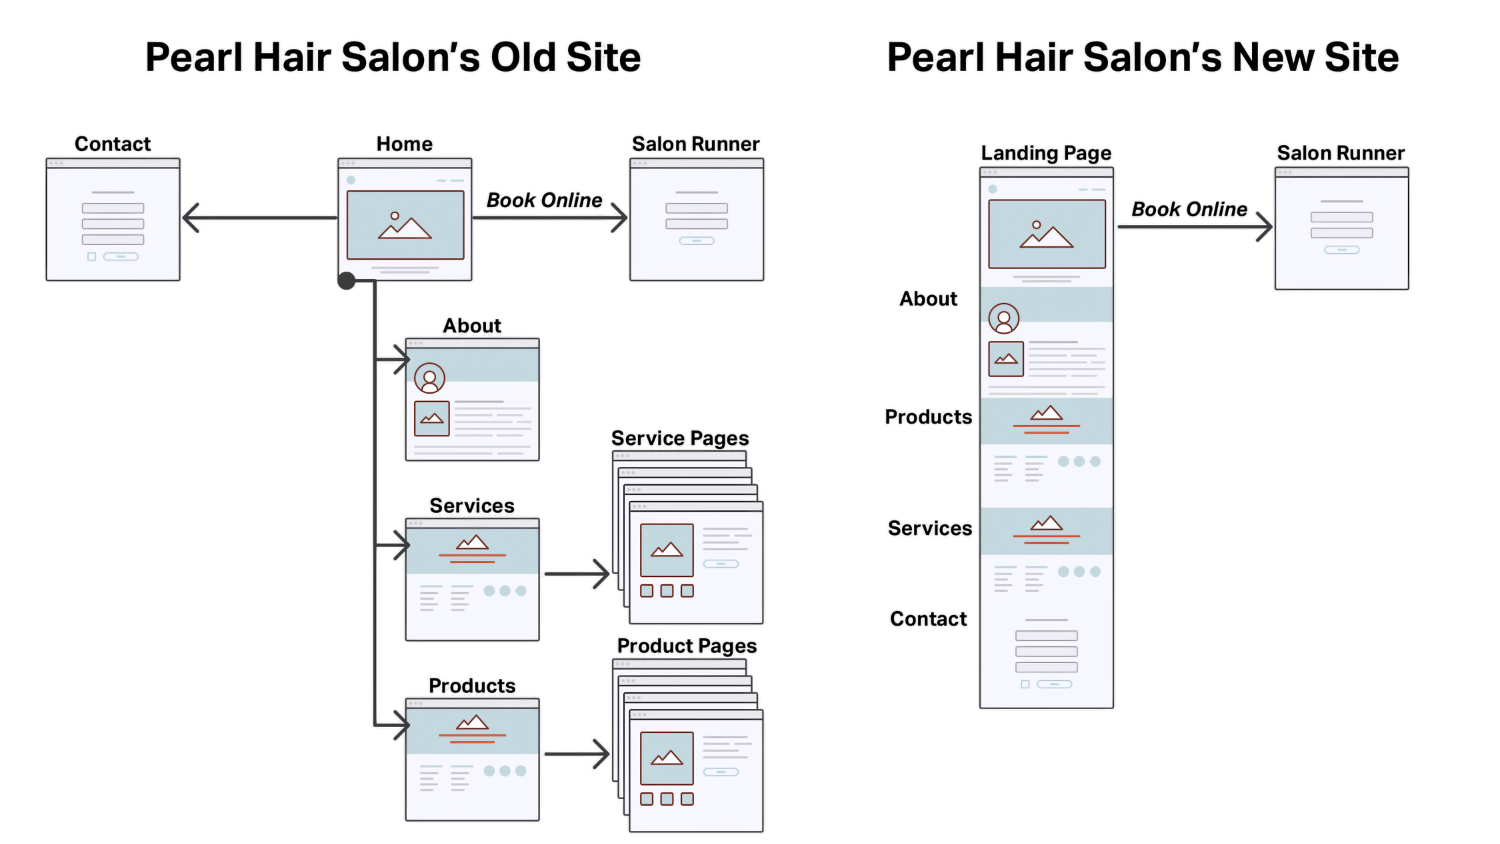 Pearl Hair Salon's site map before and after redesign.